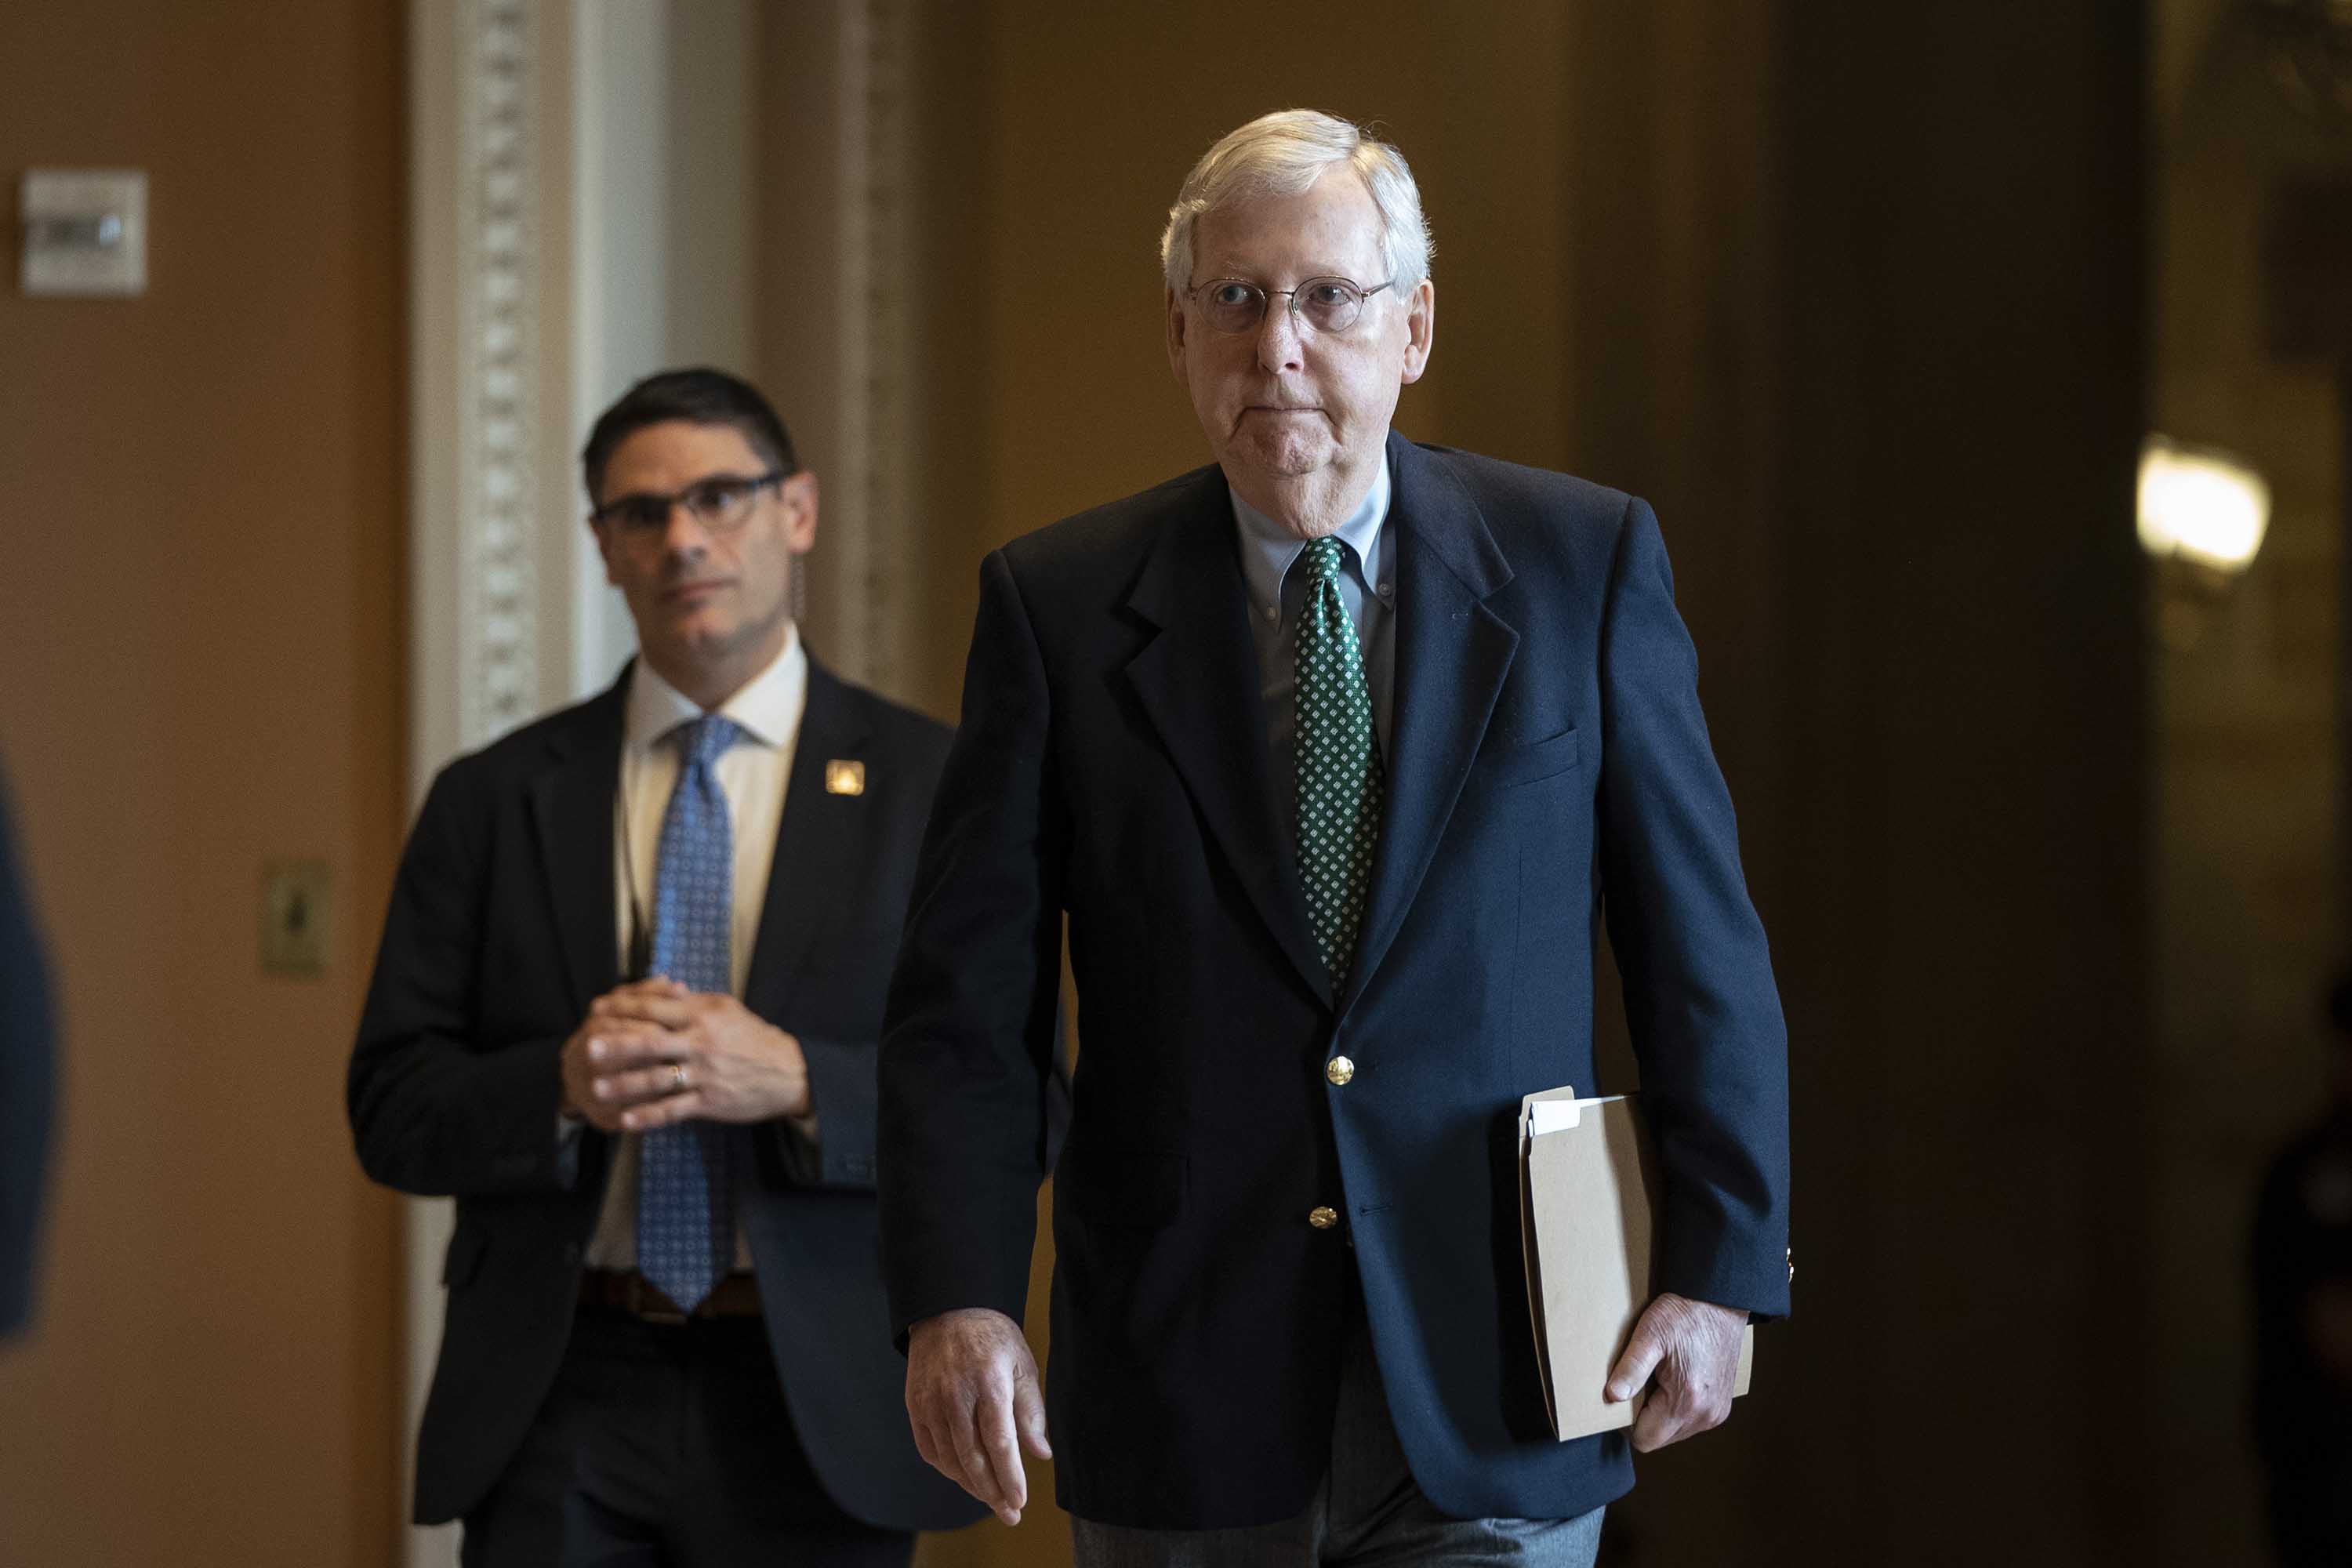 Senate Majority Leader Mitch McConnell leaves his office and walks to the Senate floor at the U.S. Capitol on March 16.